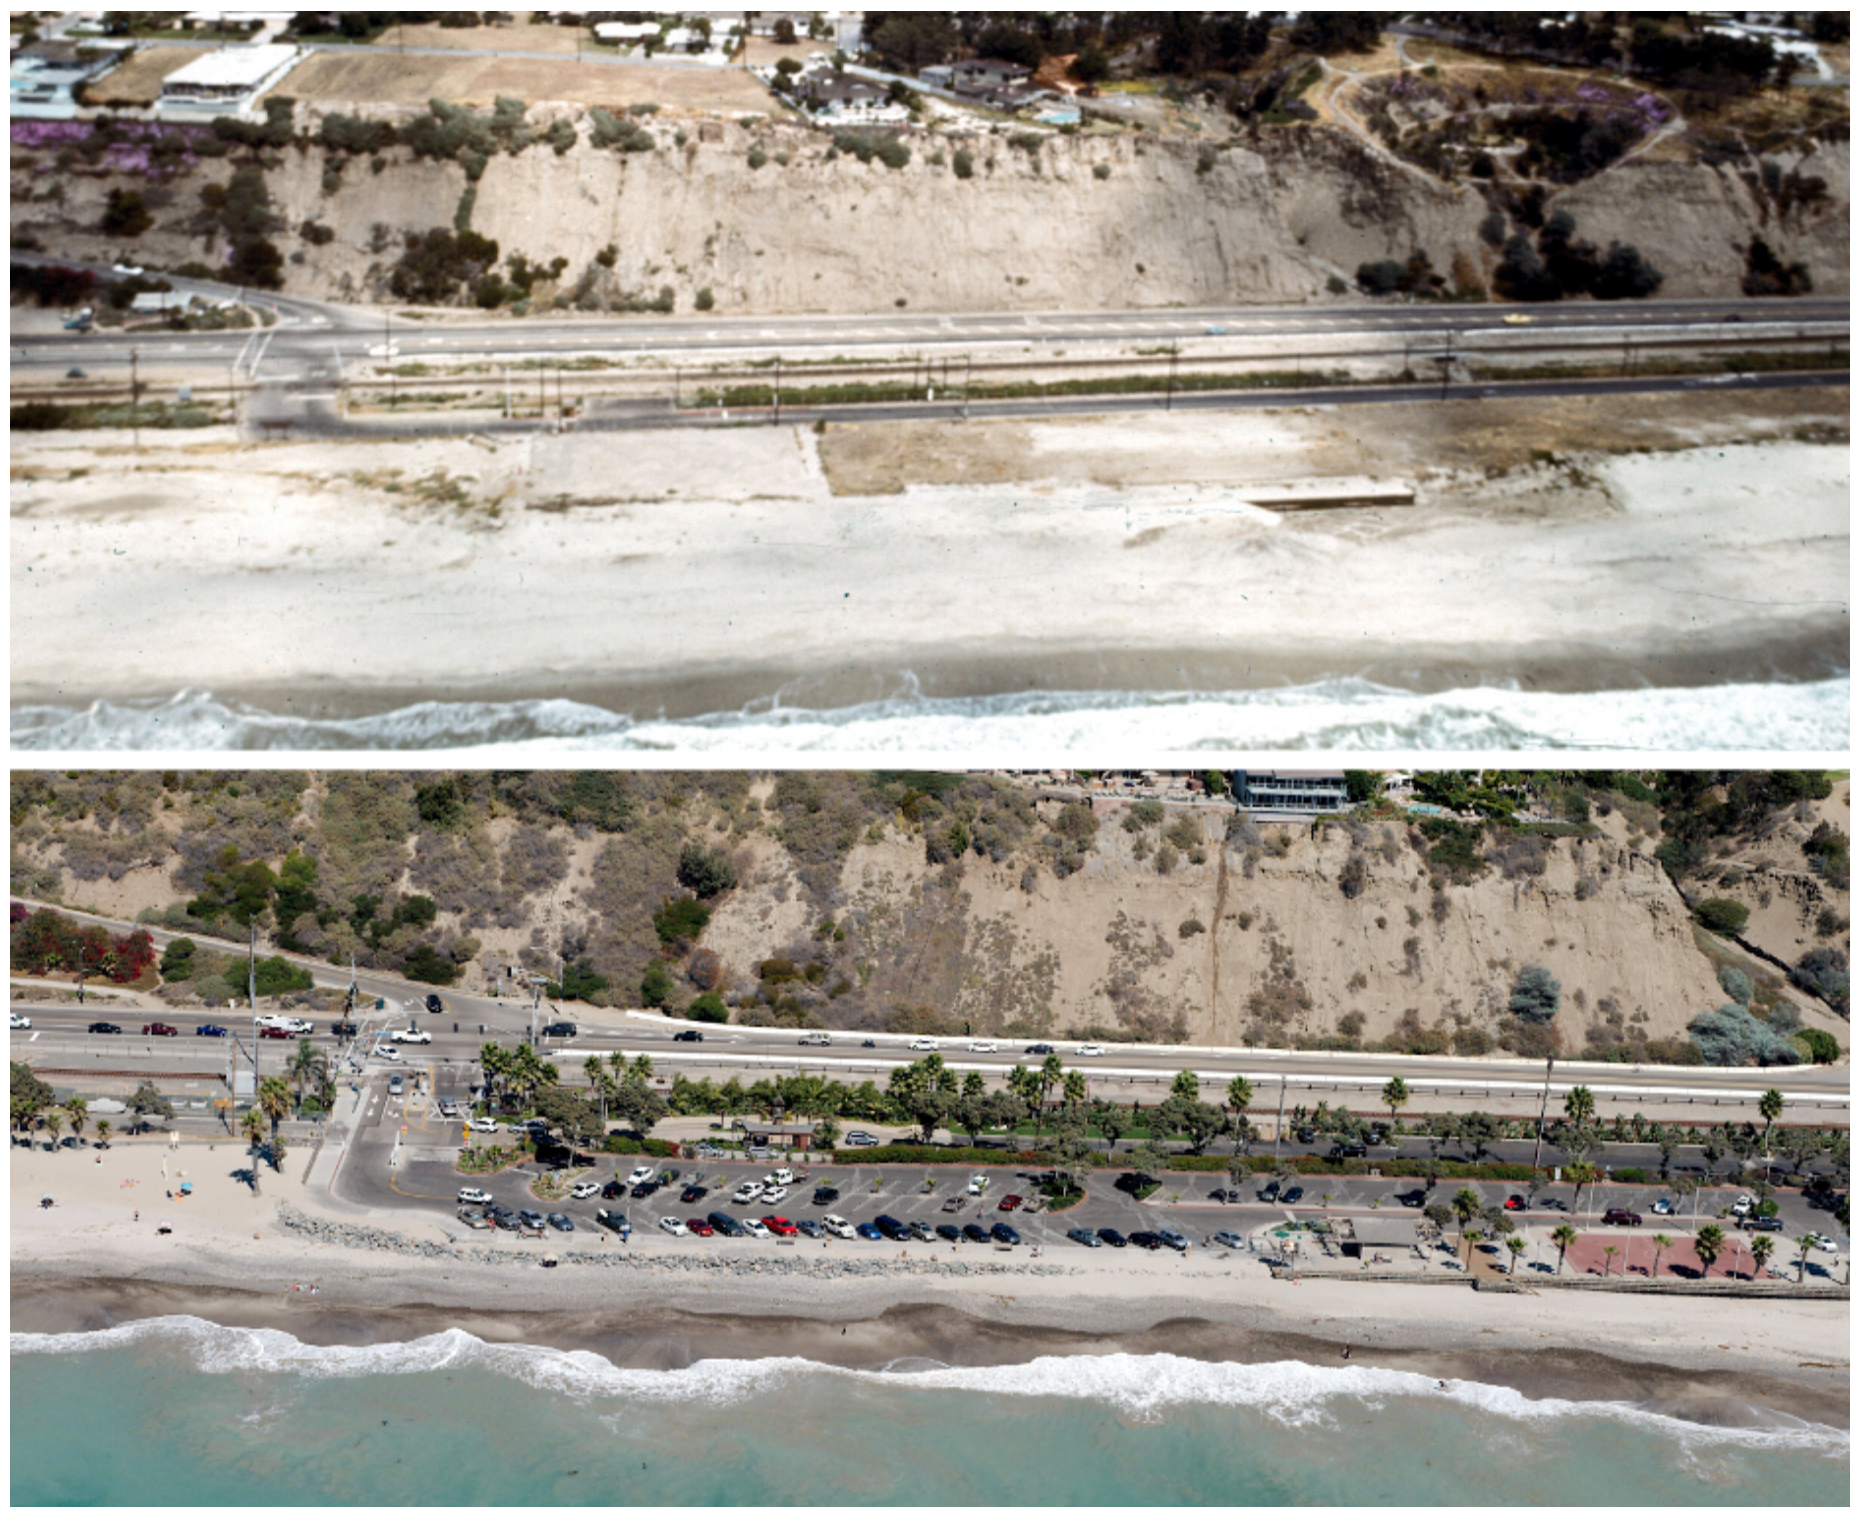 Capistrano Beach at Coast Highway and Palisades Drive in Dana Point. Photos were taken in 1972 when beaches were destroyed by storm surge (top) compared to 2013 after the city renovated the beach and underwent beach renourishment (bottom).